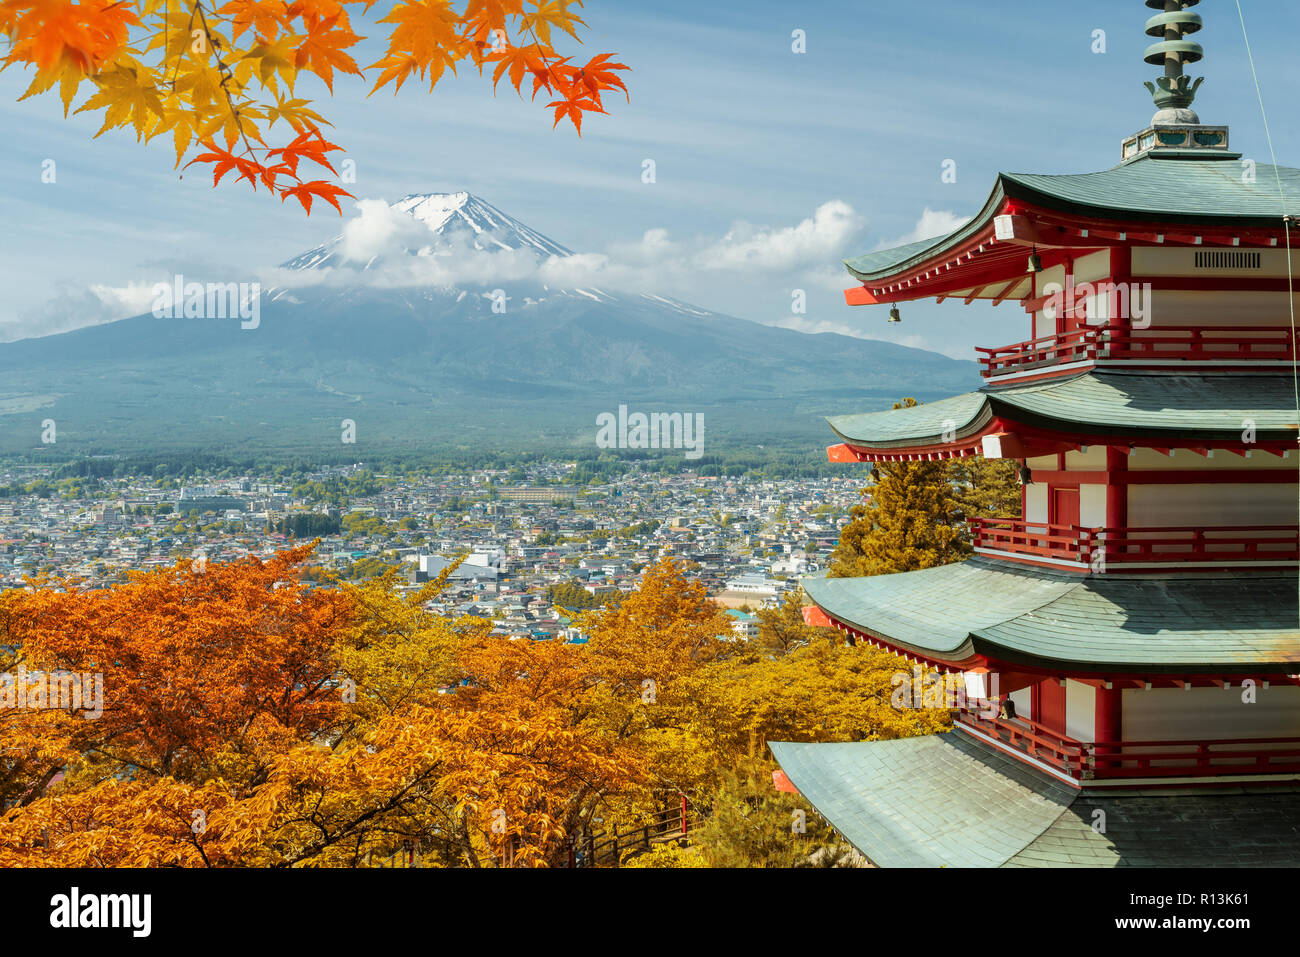 Mt. Fuji and red pagoda with autumn colors in  Japan,  Japan autumn season. Stock Photo